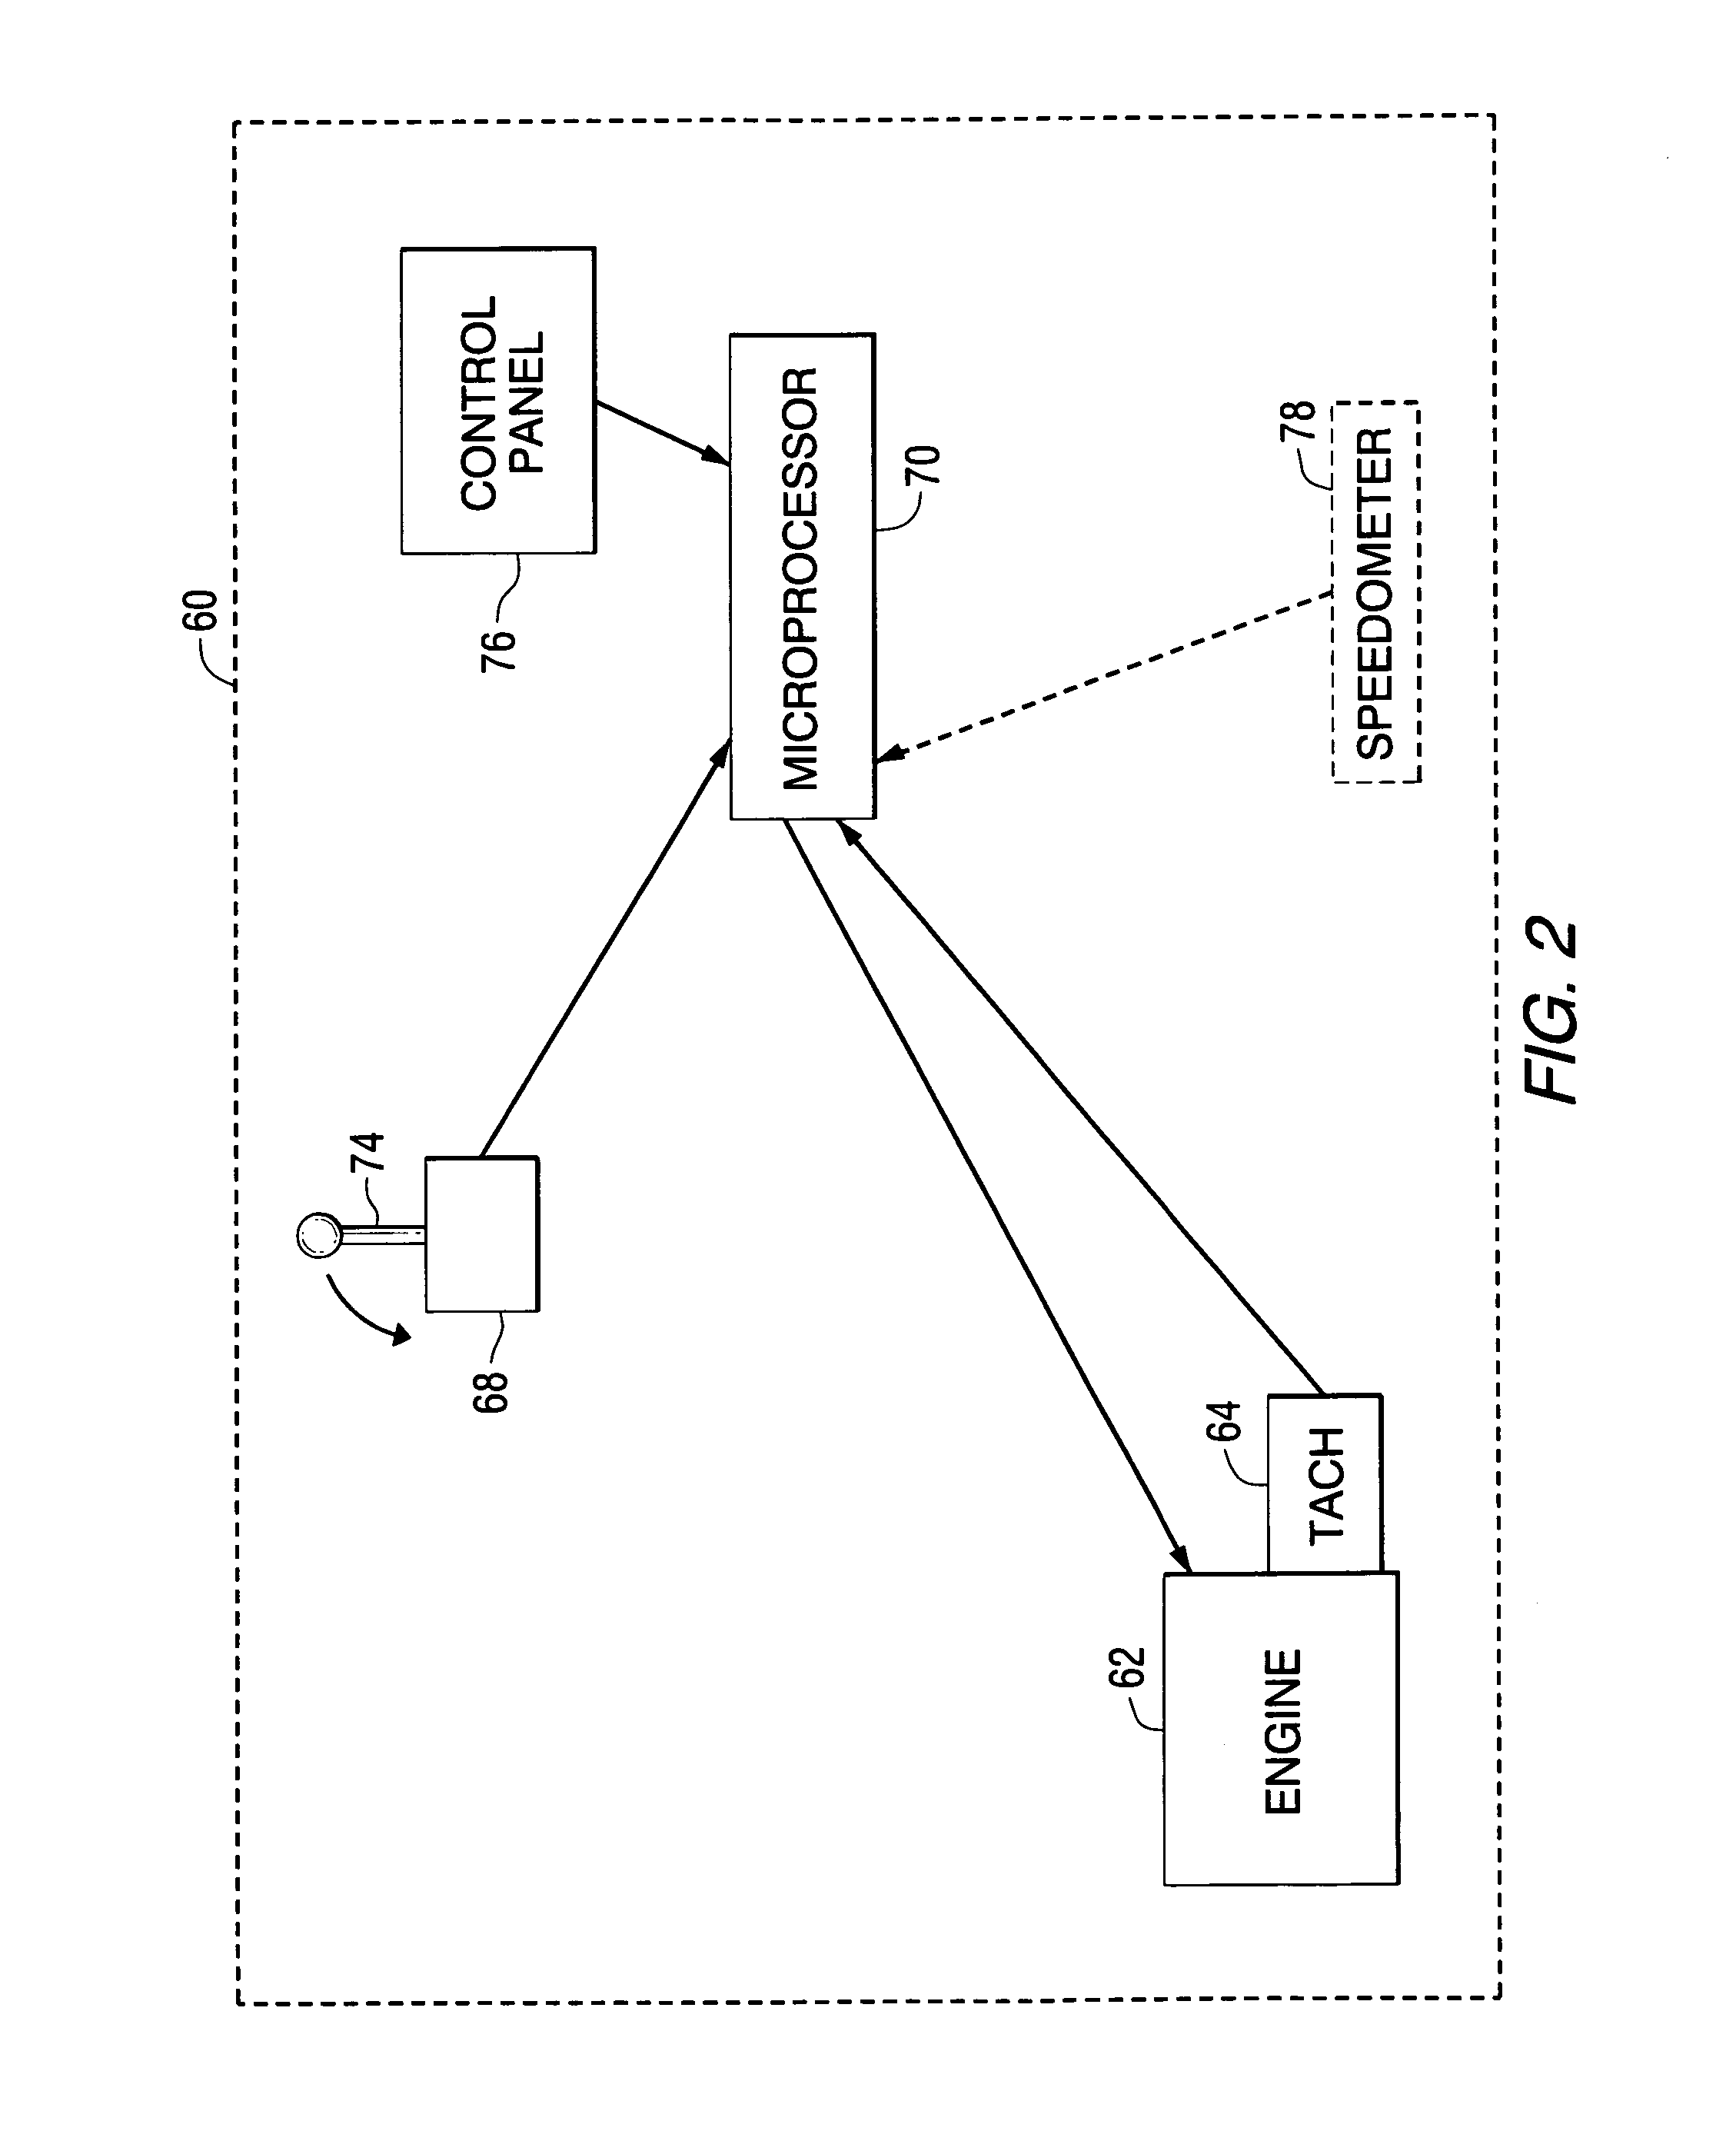 Acceleration control system for a marine vessel